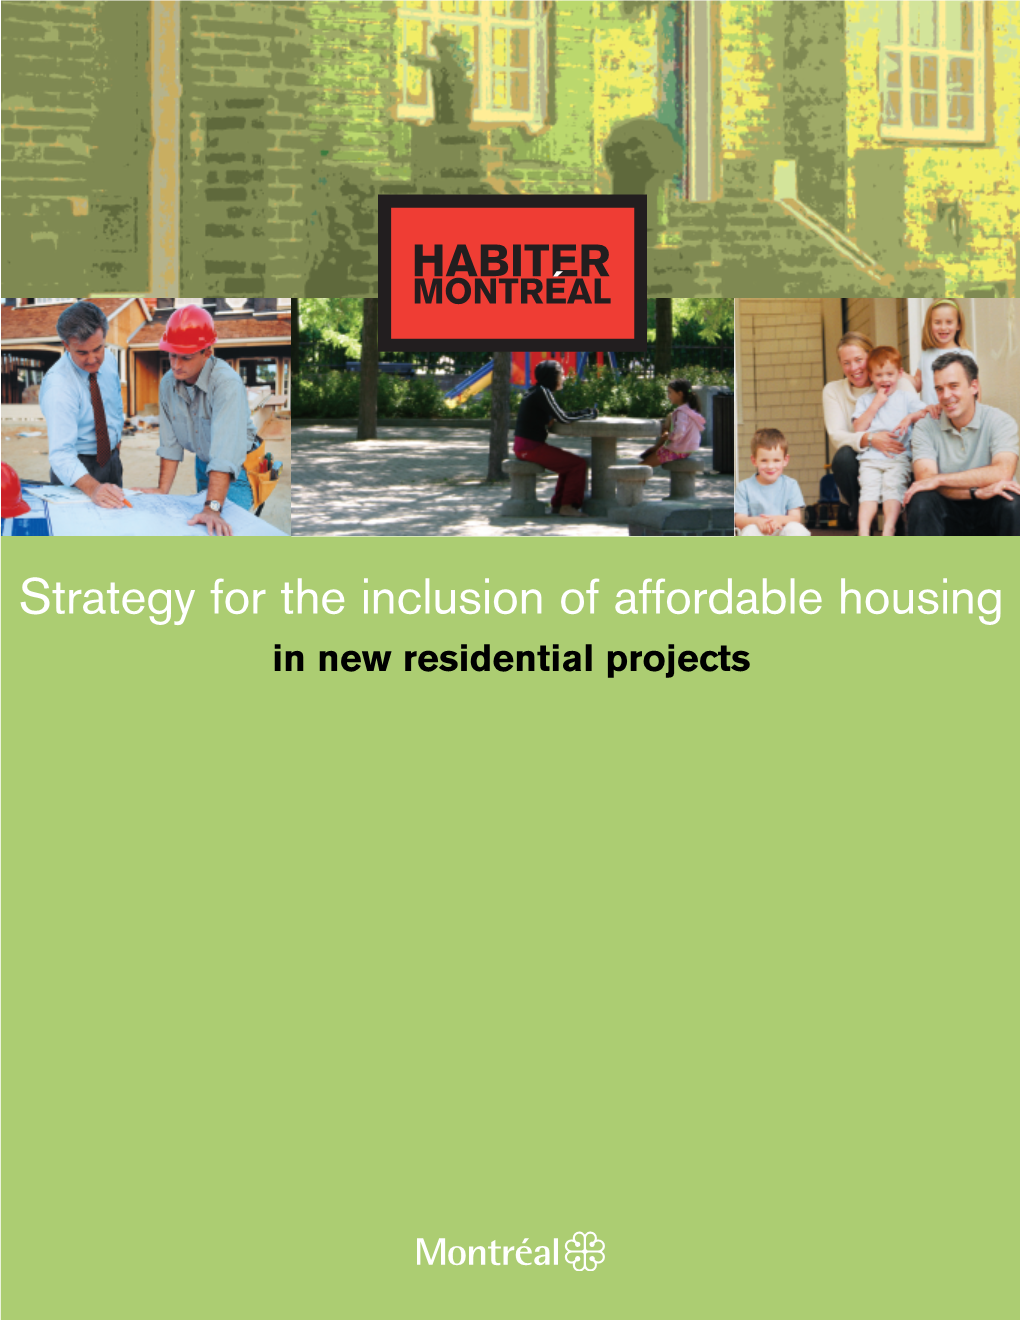 Strategy for the Inclusion of Affordable Housing in New Residential Projects